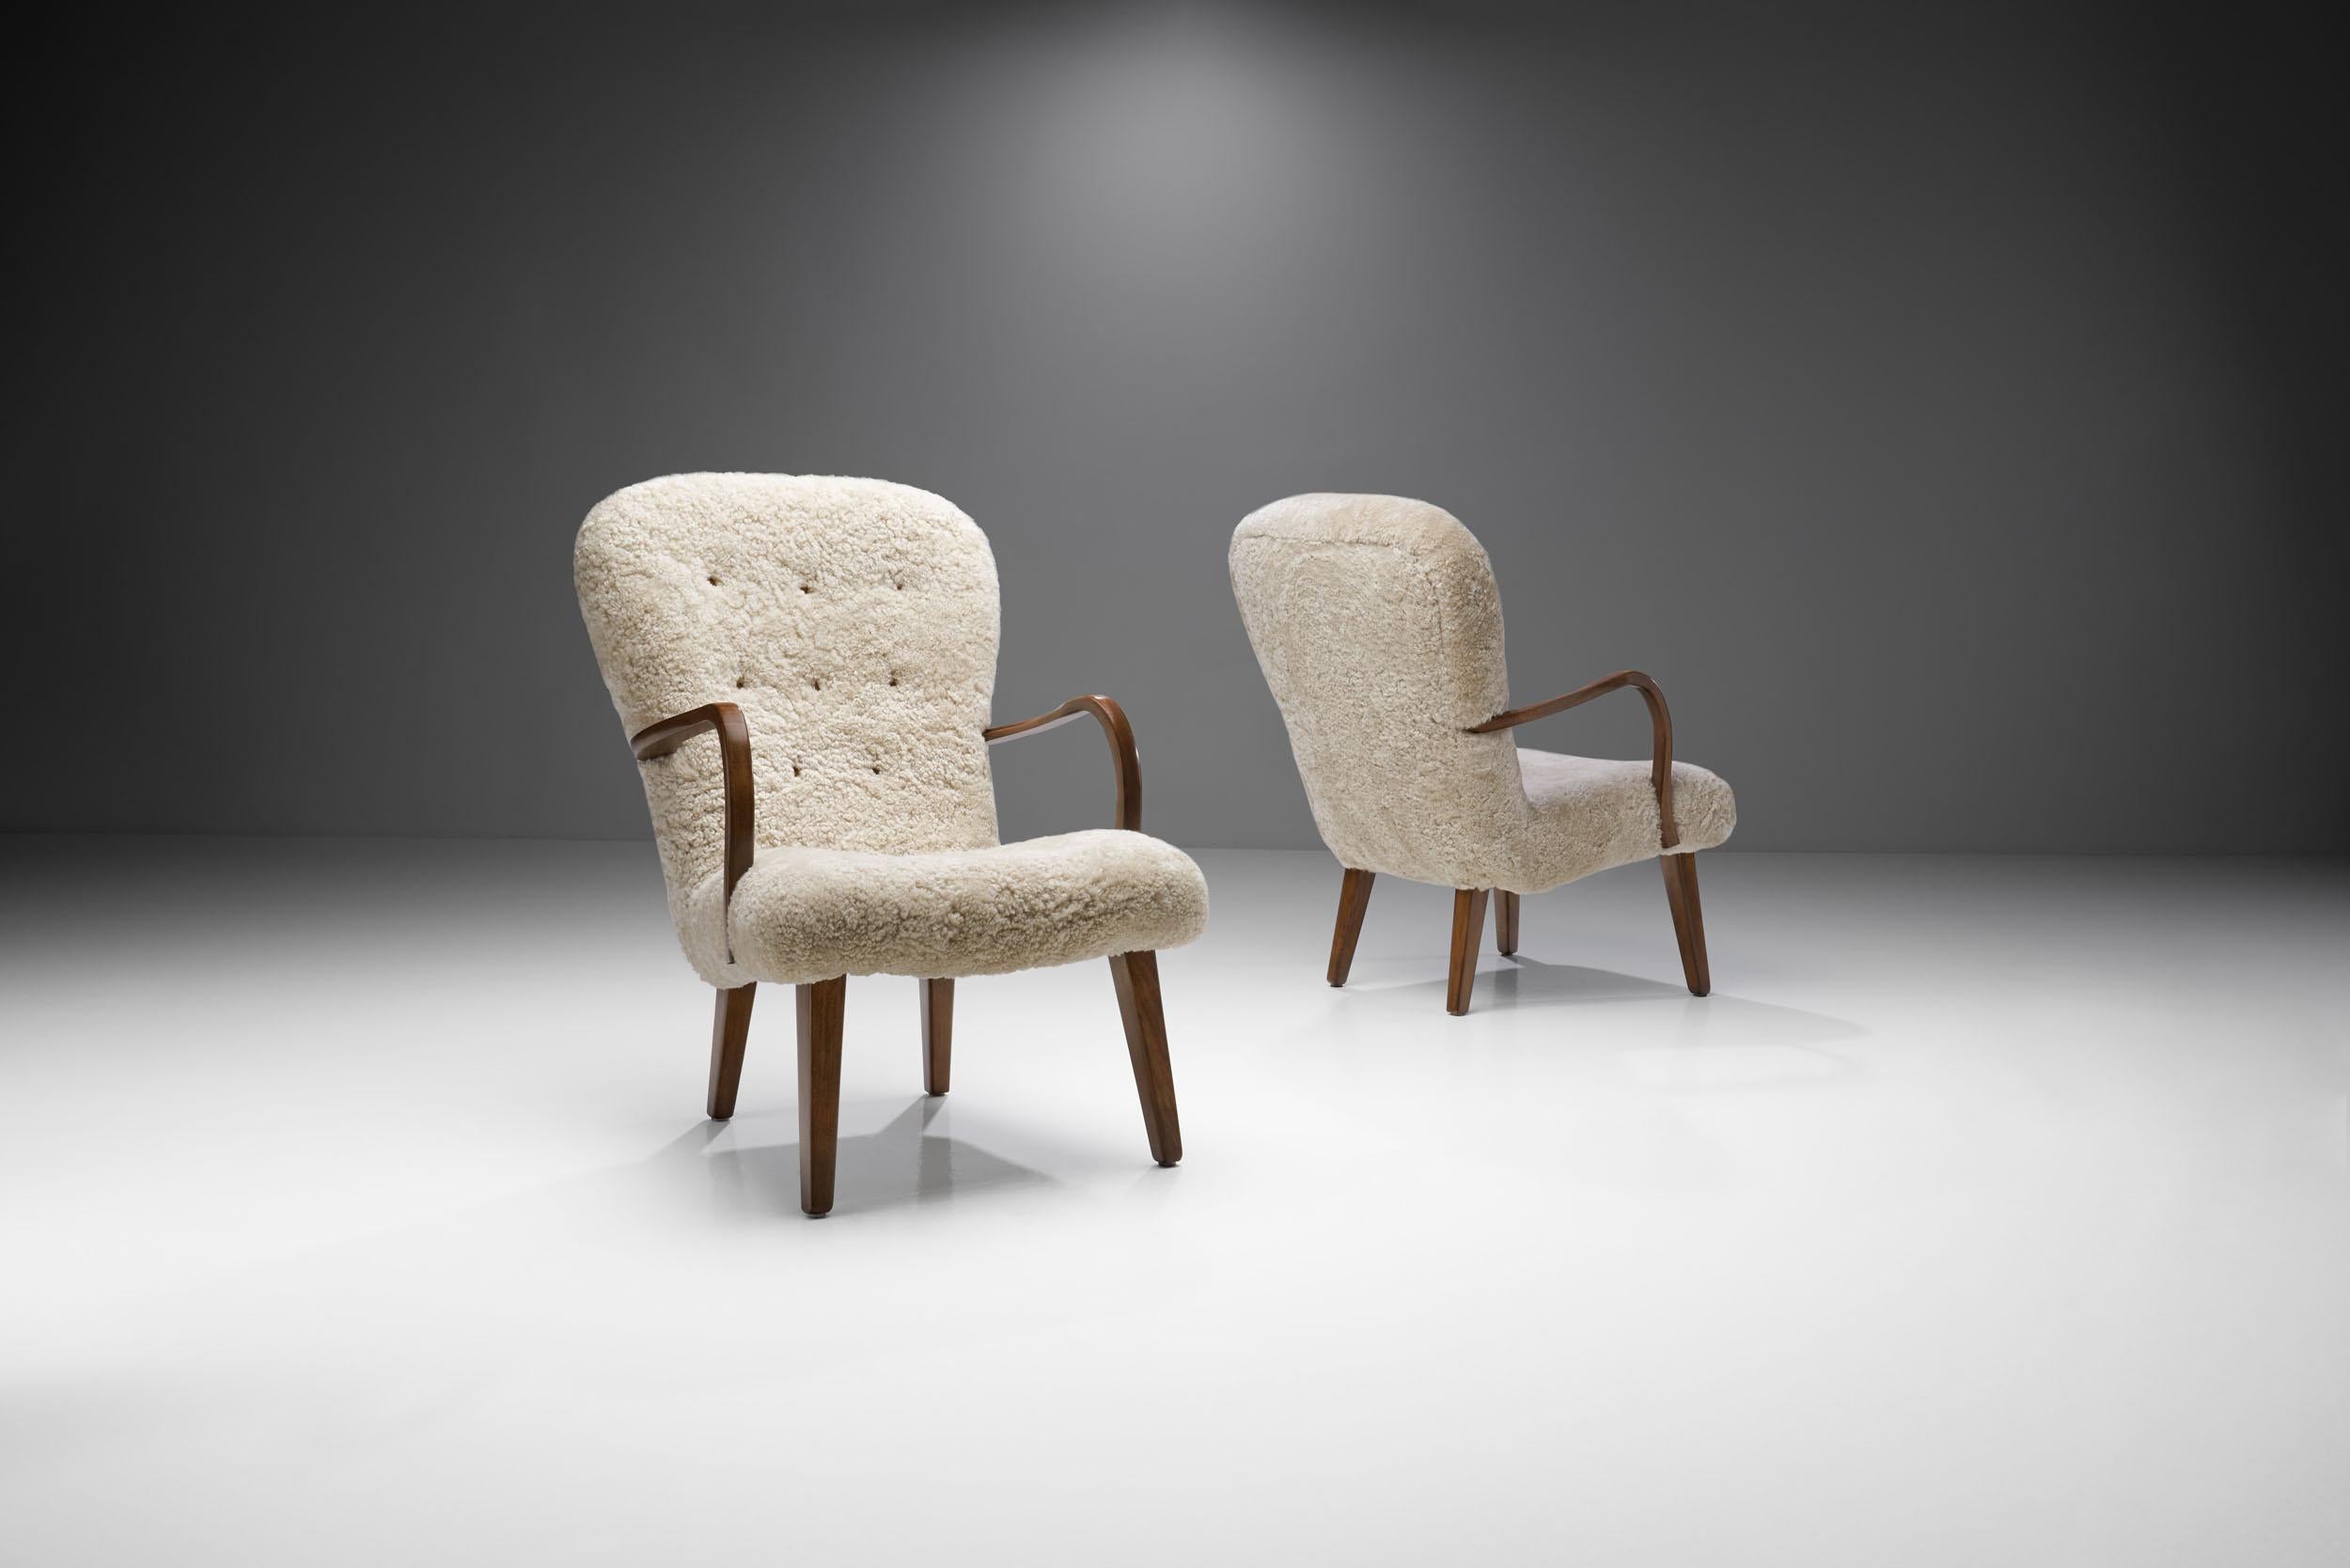 This pair of midcentury easy chairs revolves around high-quality materials, comfort and the mastery of Danish cabinetmakers. 

Danish design is a remarkable combination of concern for comfort and materiality melded with a desire for Shaker-like